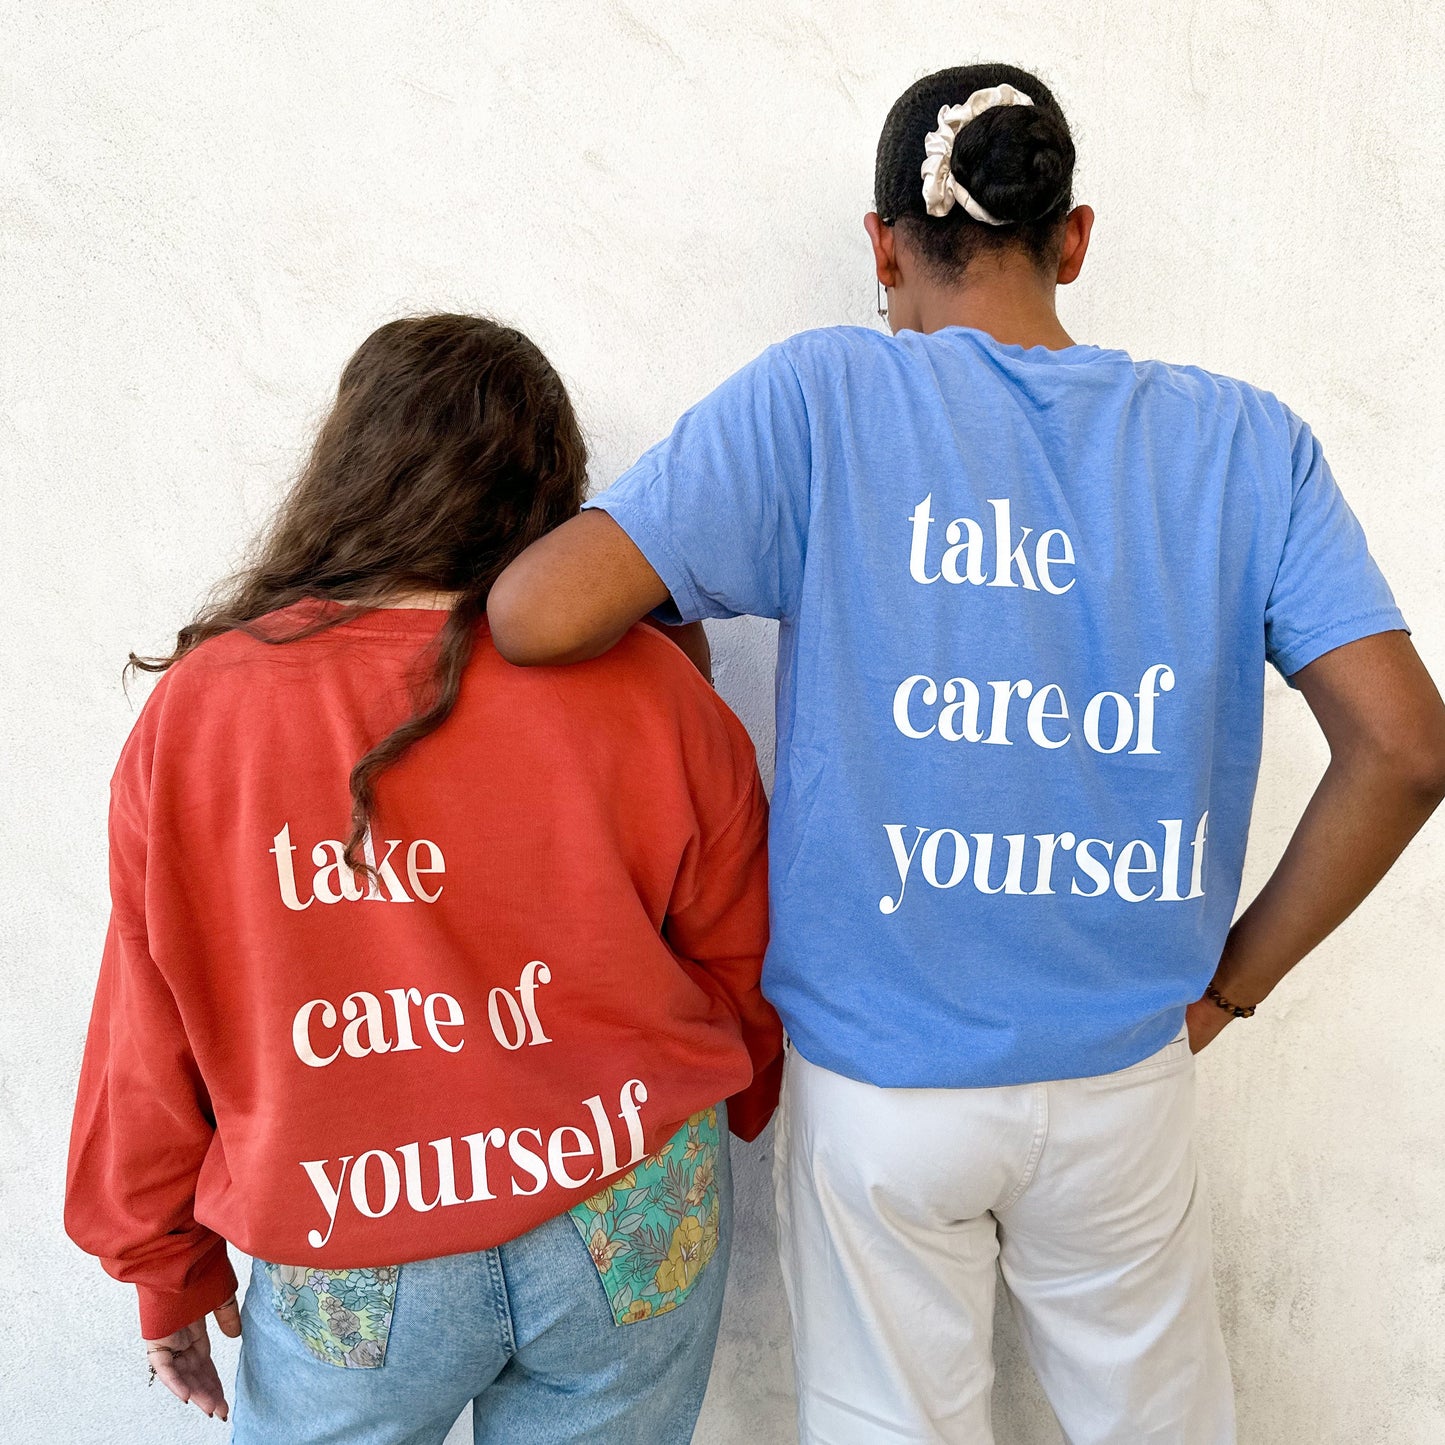 Take Care of Yourself T-shirt - Flo Blue